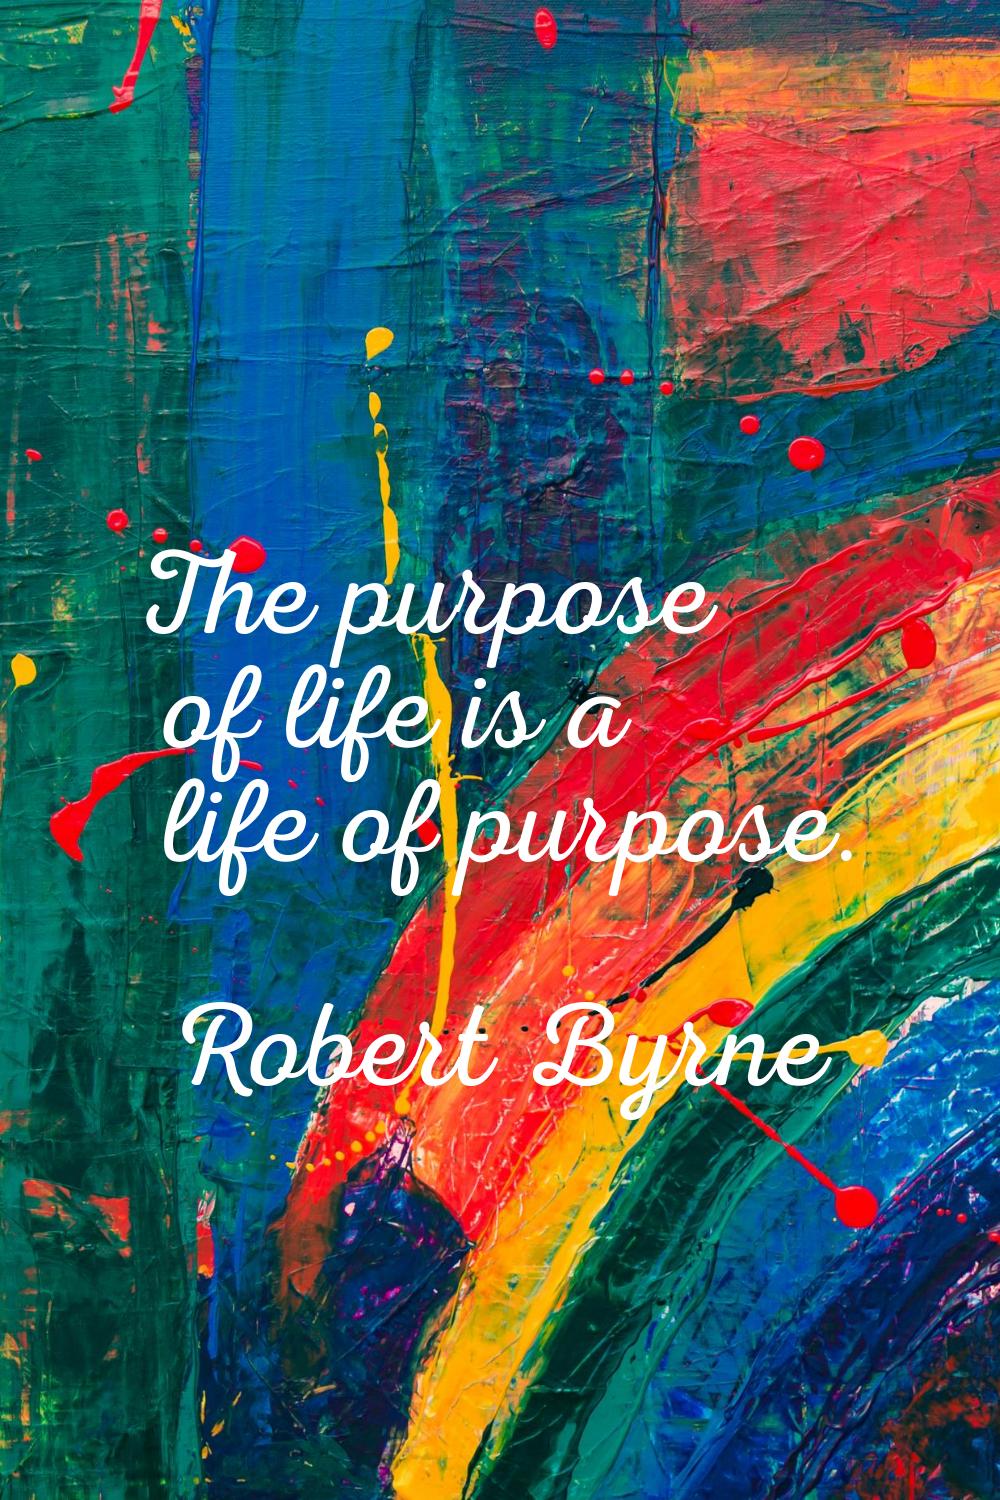 The purpose of life is a life of purpose.